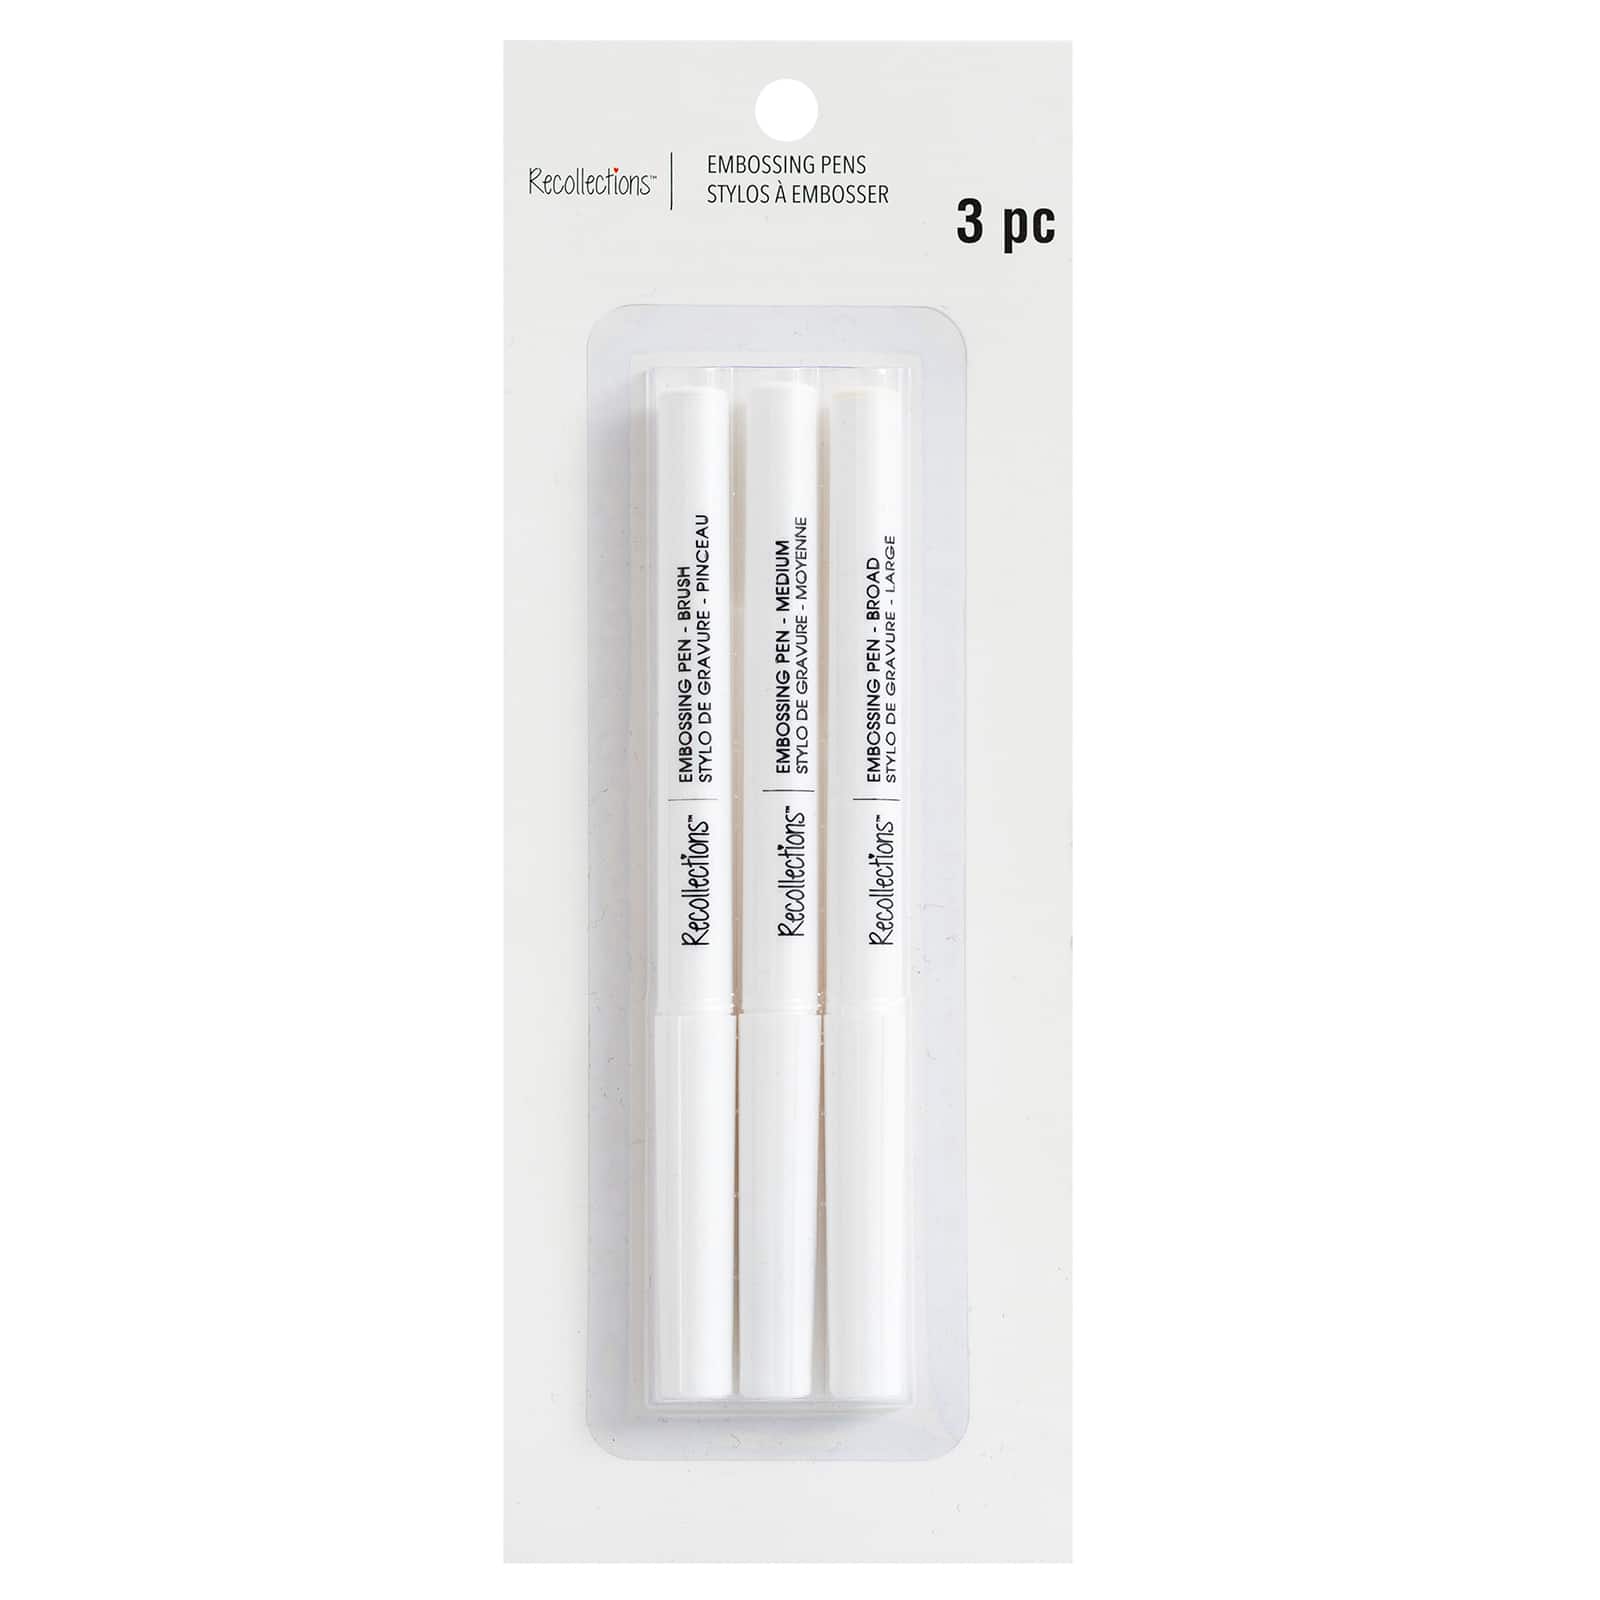 Recollections Embossing Pens - 3 ct